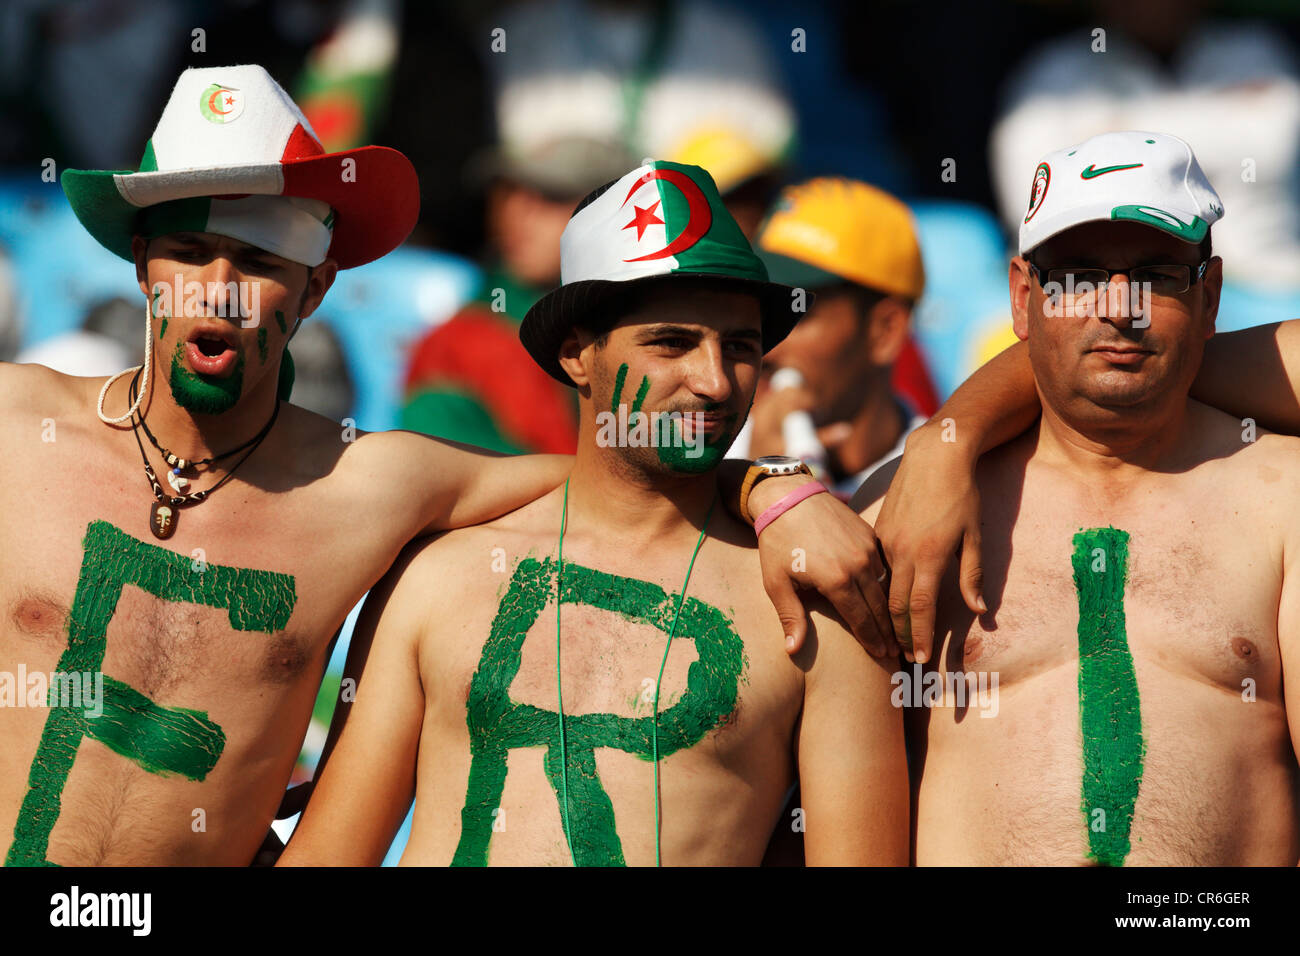 Spectators demonstrate their support for Algeria at a 2010 FIFA World Cup match between Algeria and the United States. Stock Photo